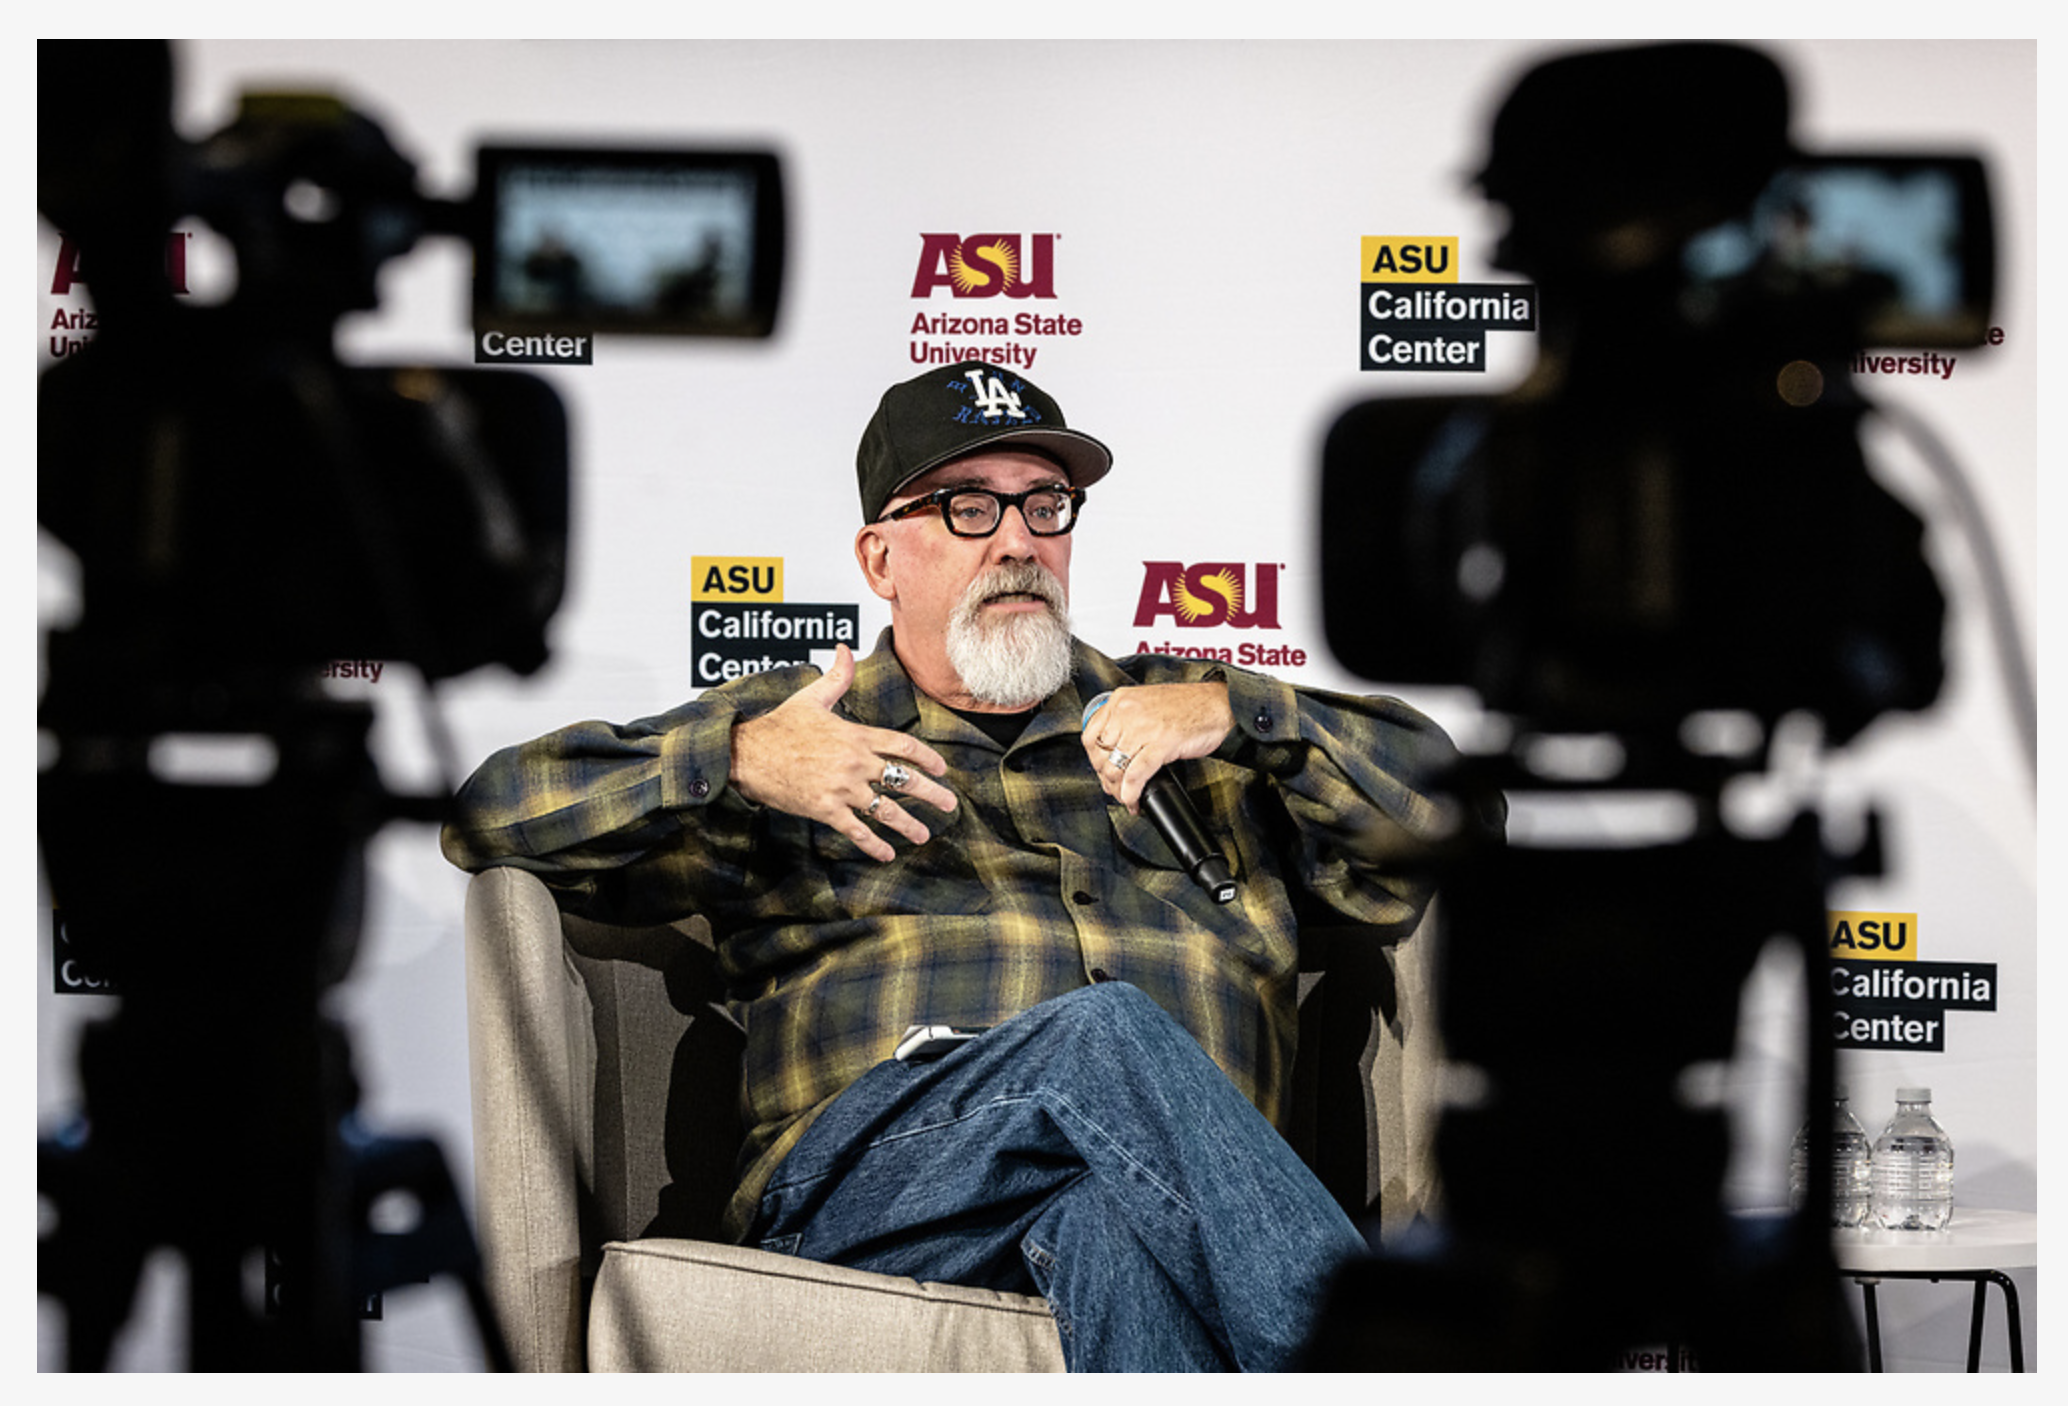 Peter Murrieta speaks at the opening event for The Sidney Poitier New American Film School at ASU California Center in LA in October 2022.